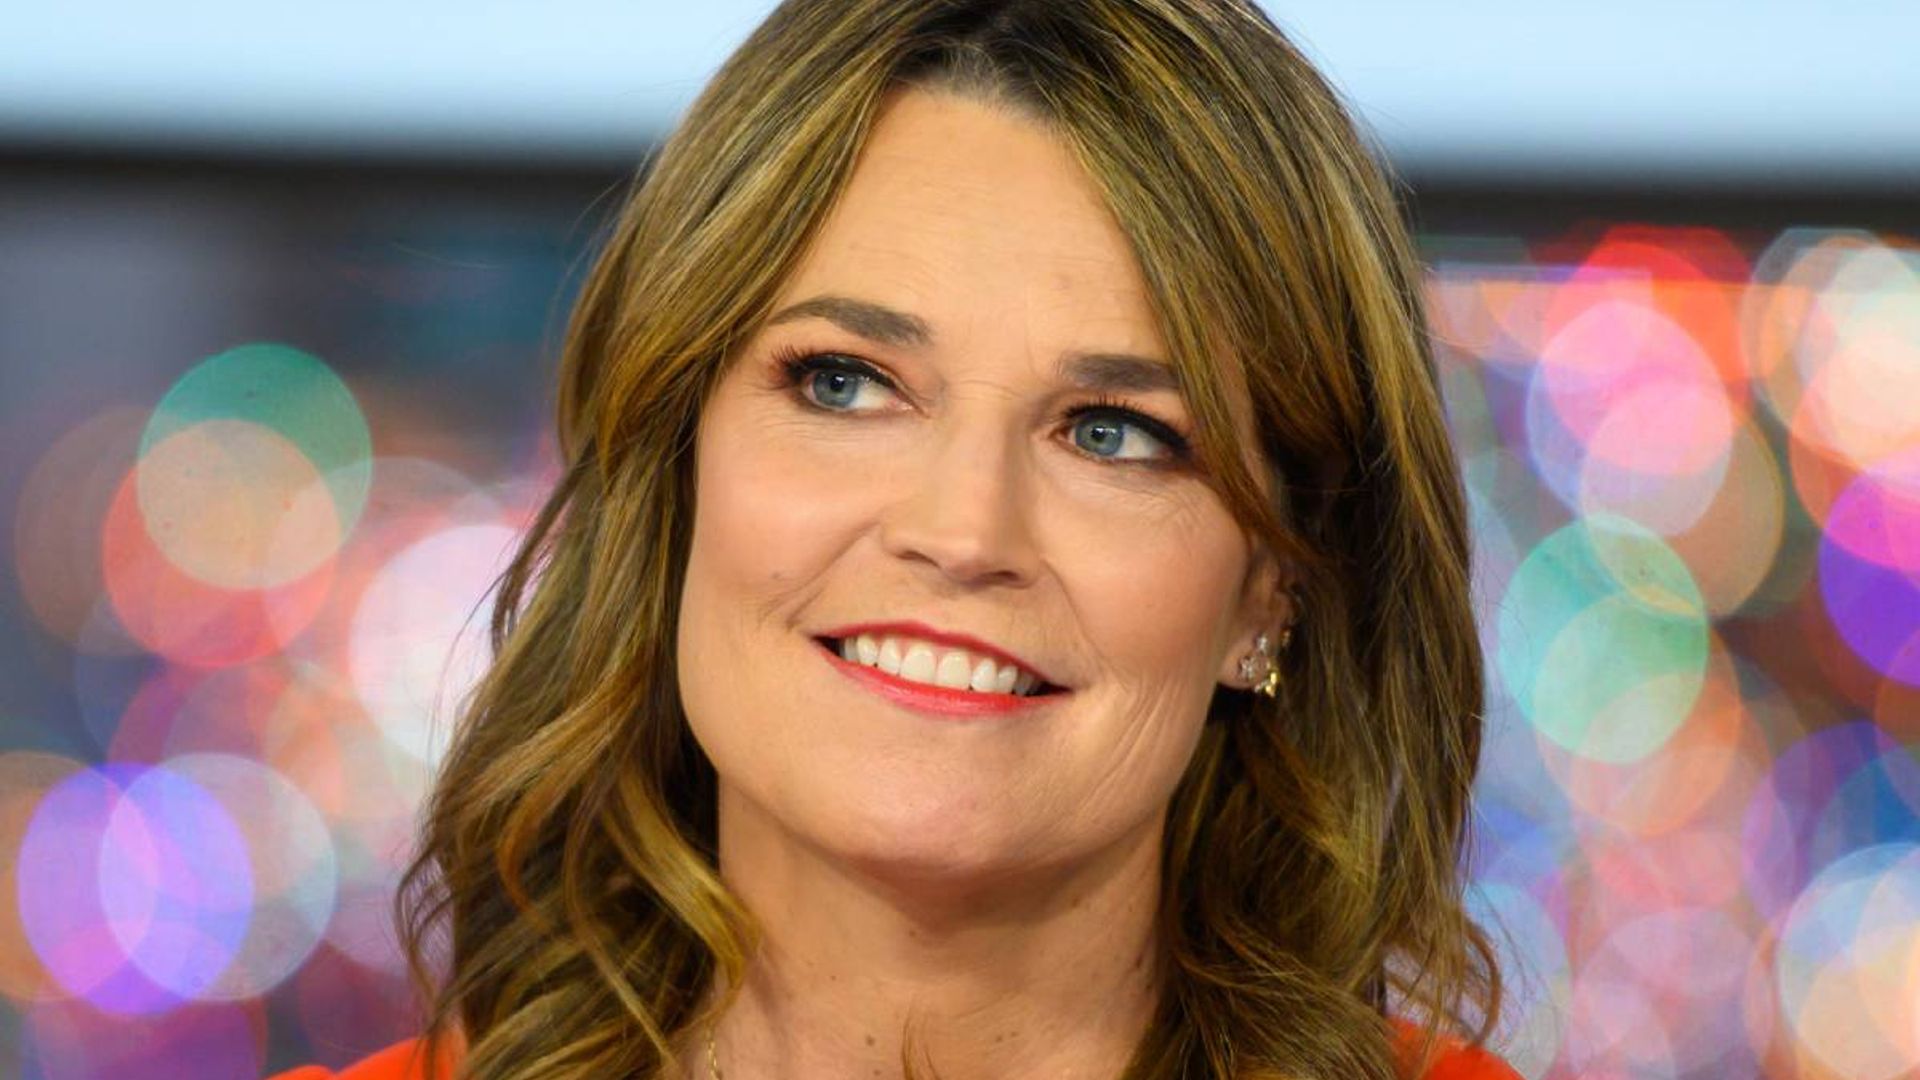 Today star Savannah Guthrie offered support to her co-star in their hour of...